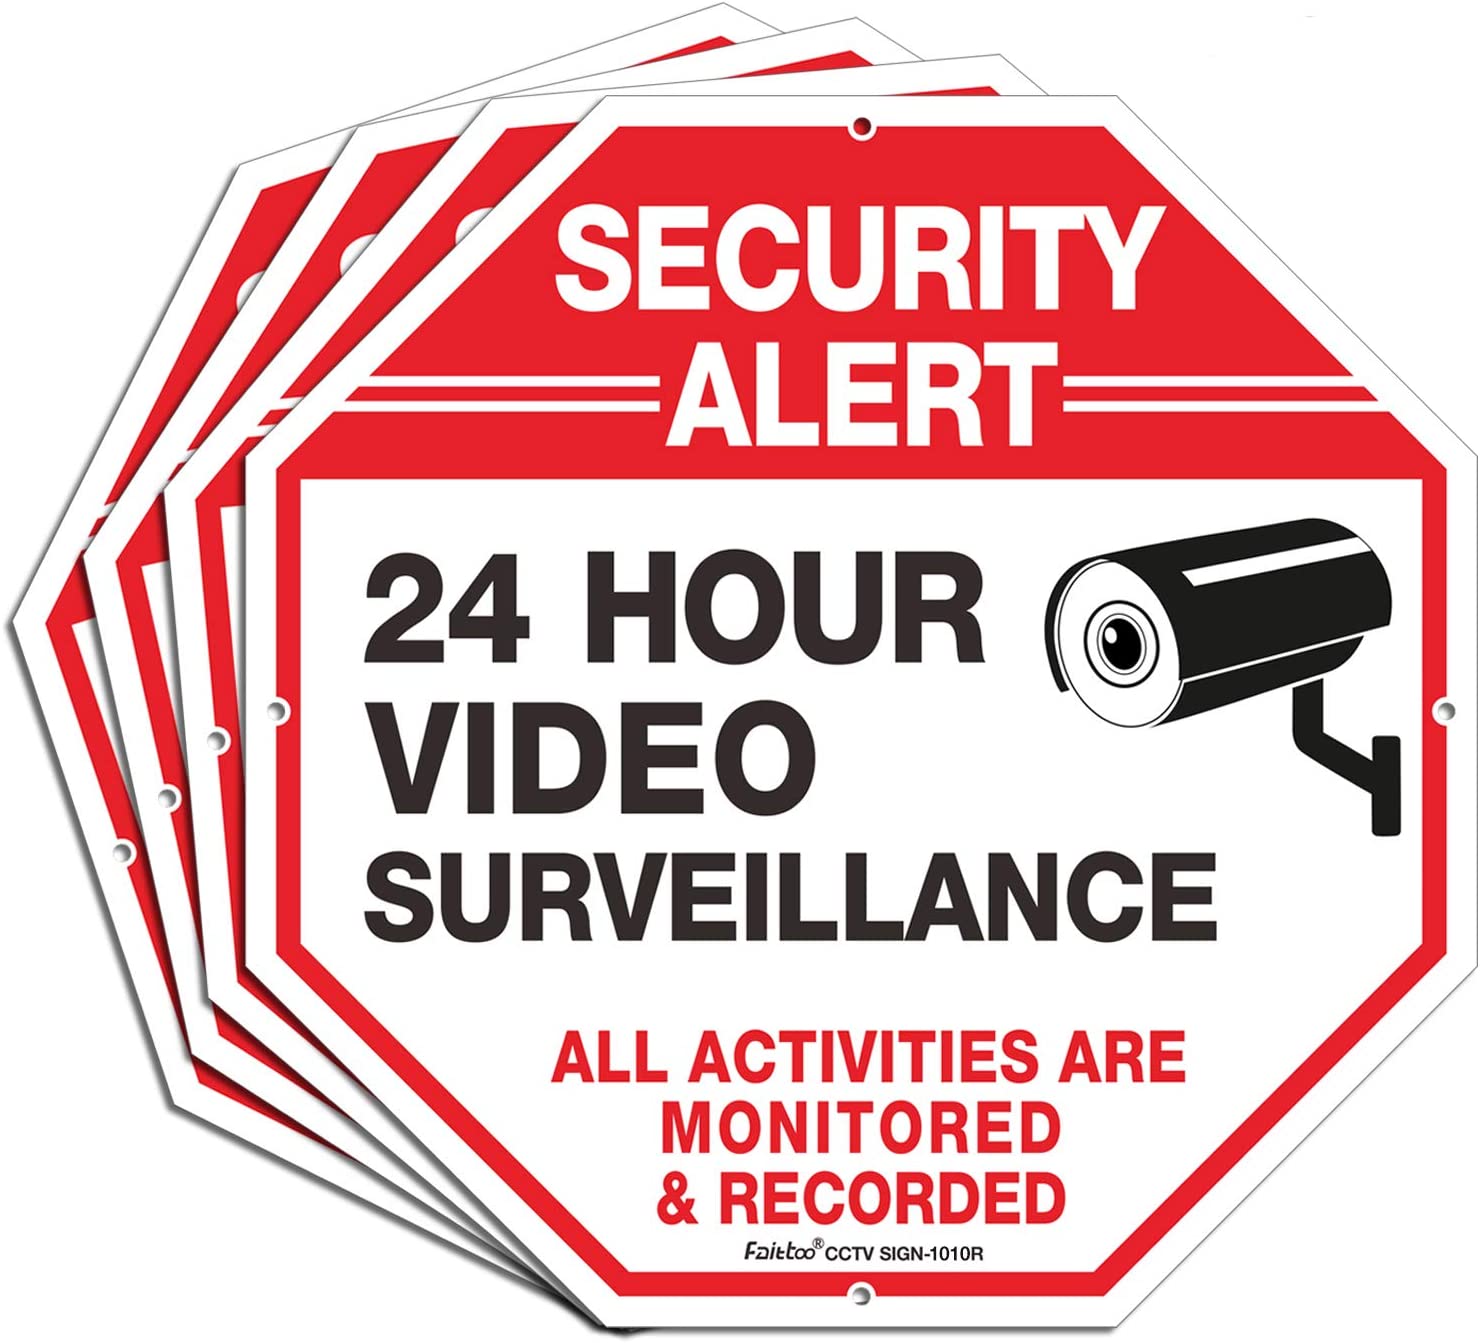 (4 Pack) &#34;Security Alert, 24 Hour Video Surveillance, All Activities Monitored&#34; Signs,10x10 Inches .040 Aluminum Reflective Warning Sign for Home Business CCTV Security Camera, Indoor or Outdoor Use